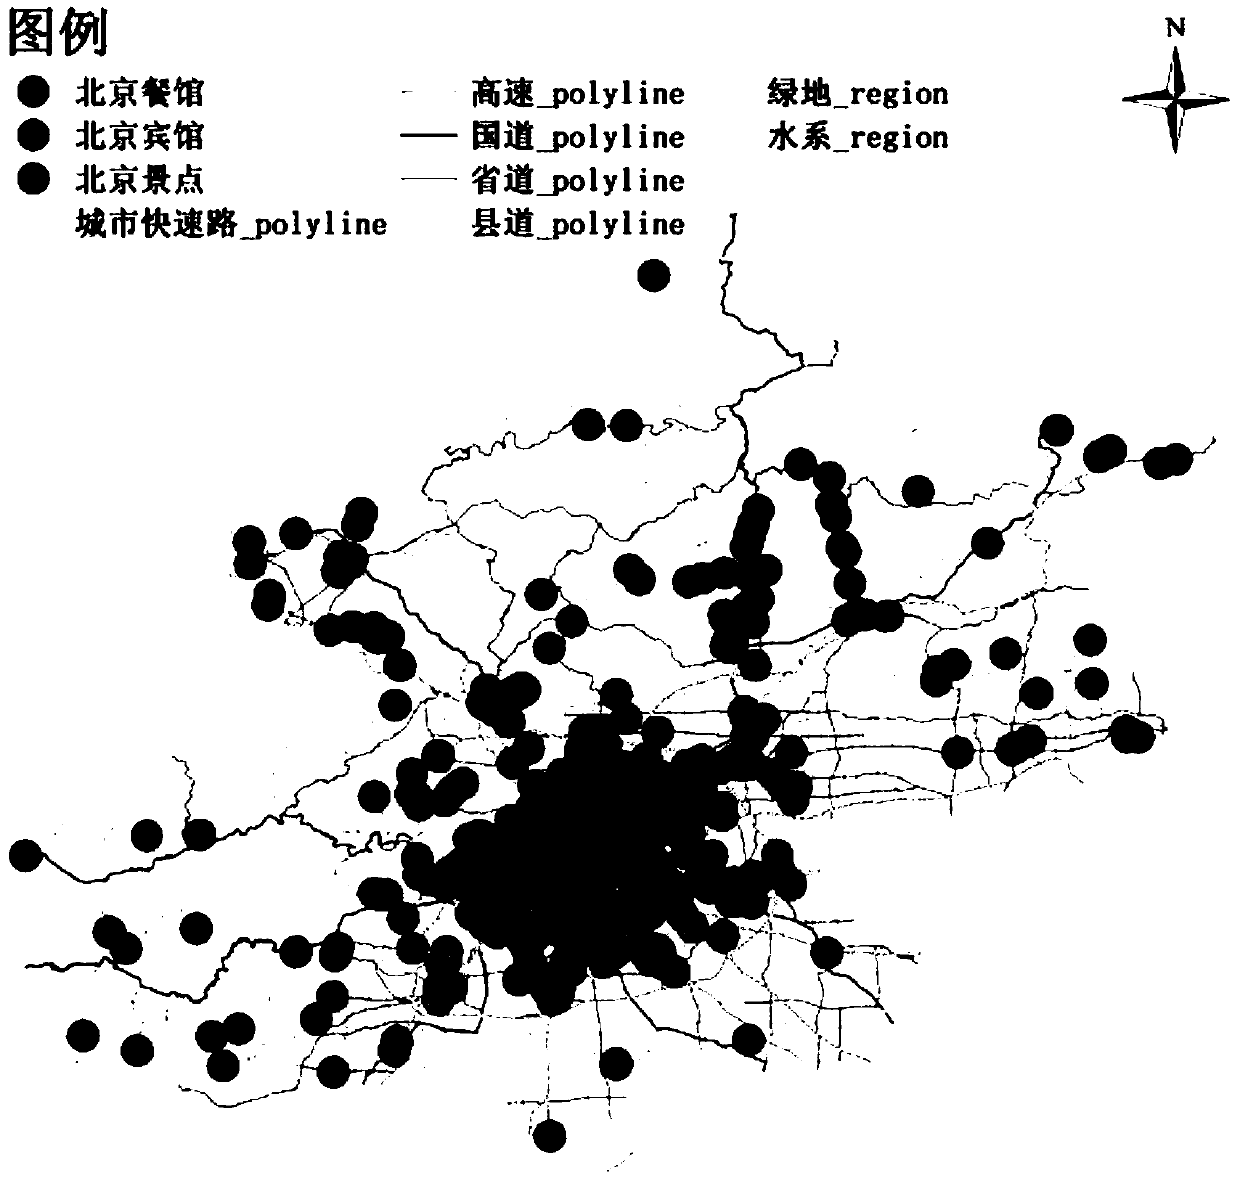 Personalized recommendation method of tourism route based on group intelligence perception